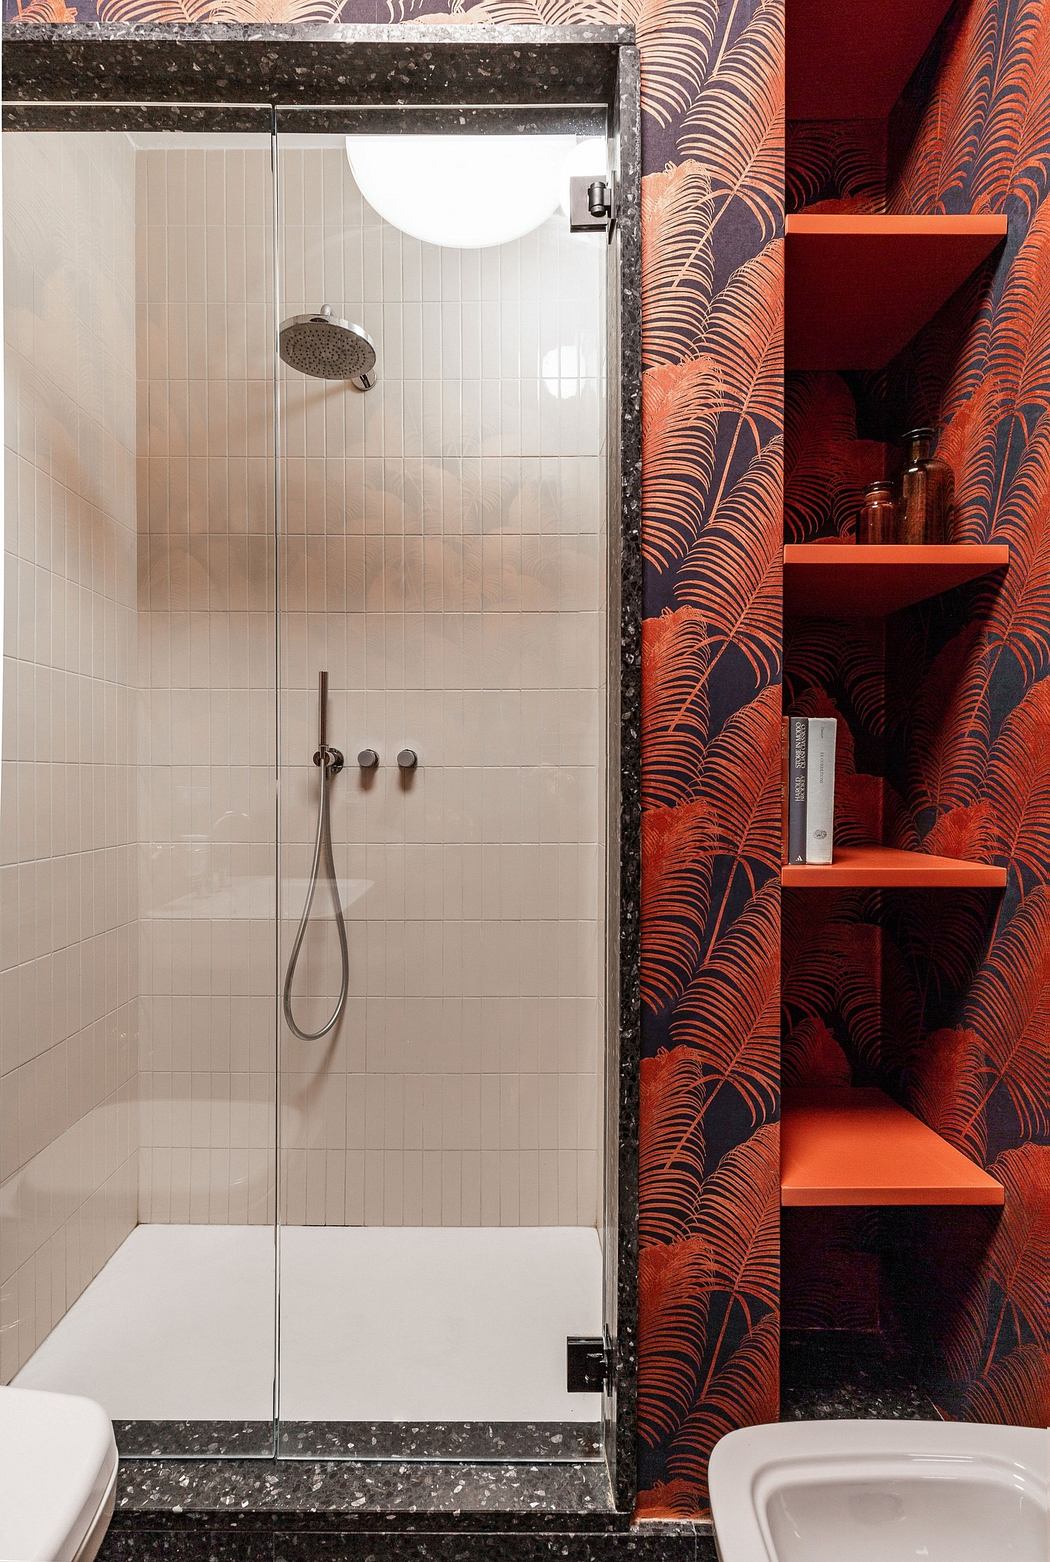 Contemporary bathroom with patterned wallpaper and built-in shelves.